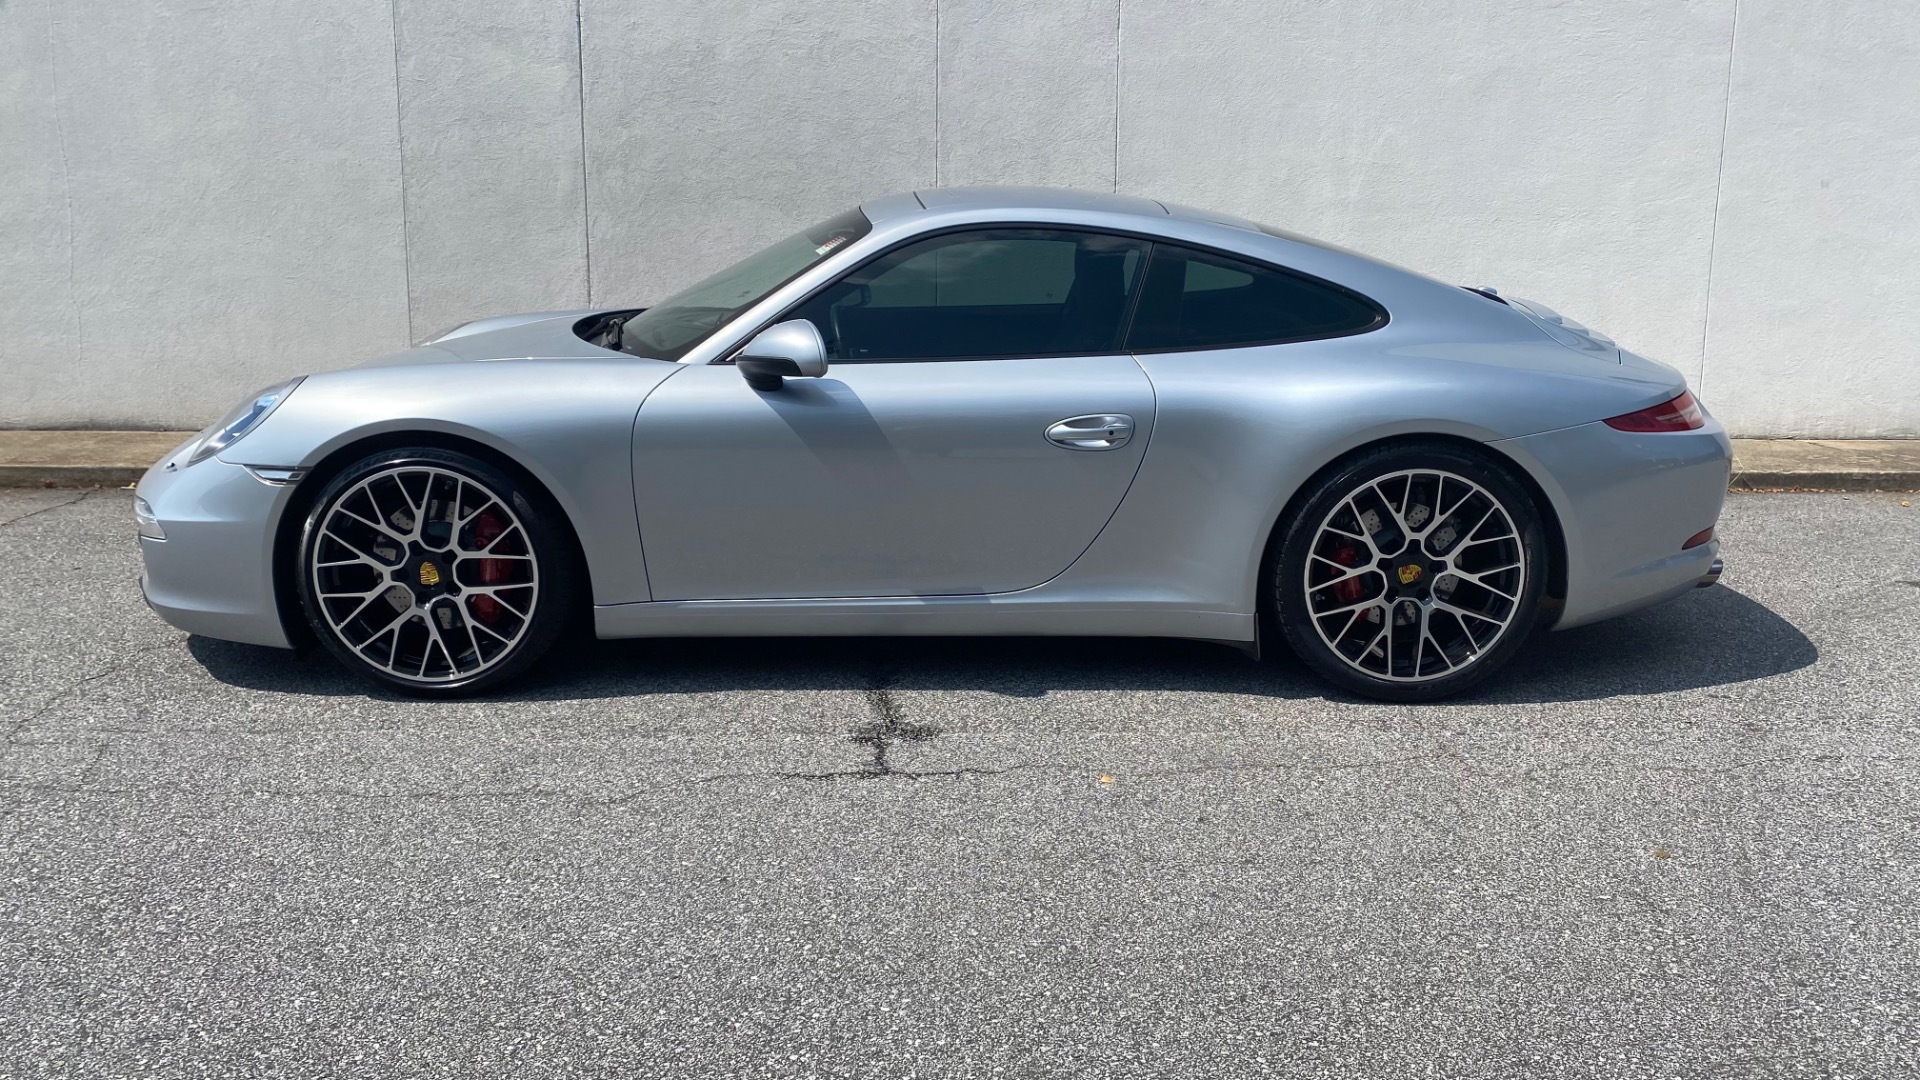 Used 2014 Porsche 911 CARRERA S / SPORT EXHAUST / SPORT DESIGN WHEELS / SPORT SEATS / SPORT CHRON for sale $79,500 at Formula Imports in Charlotte NC 28227 4